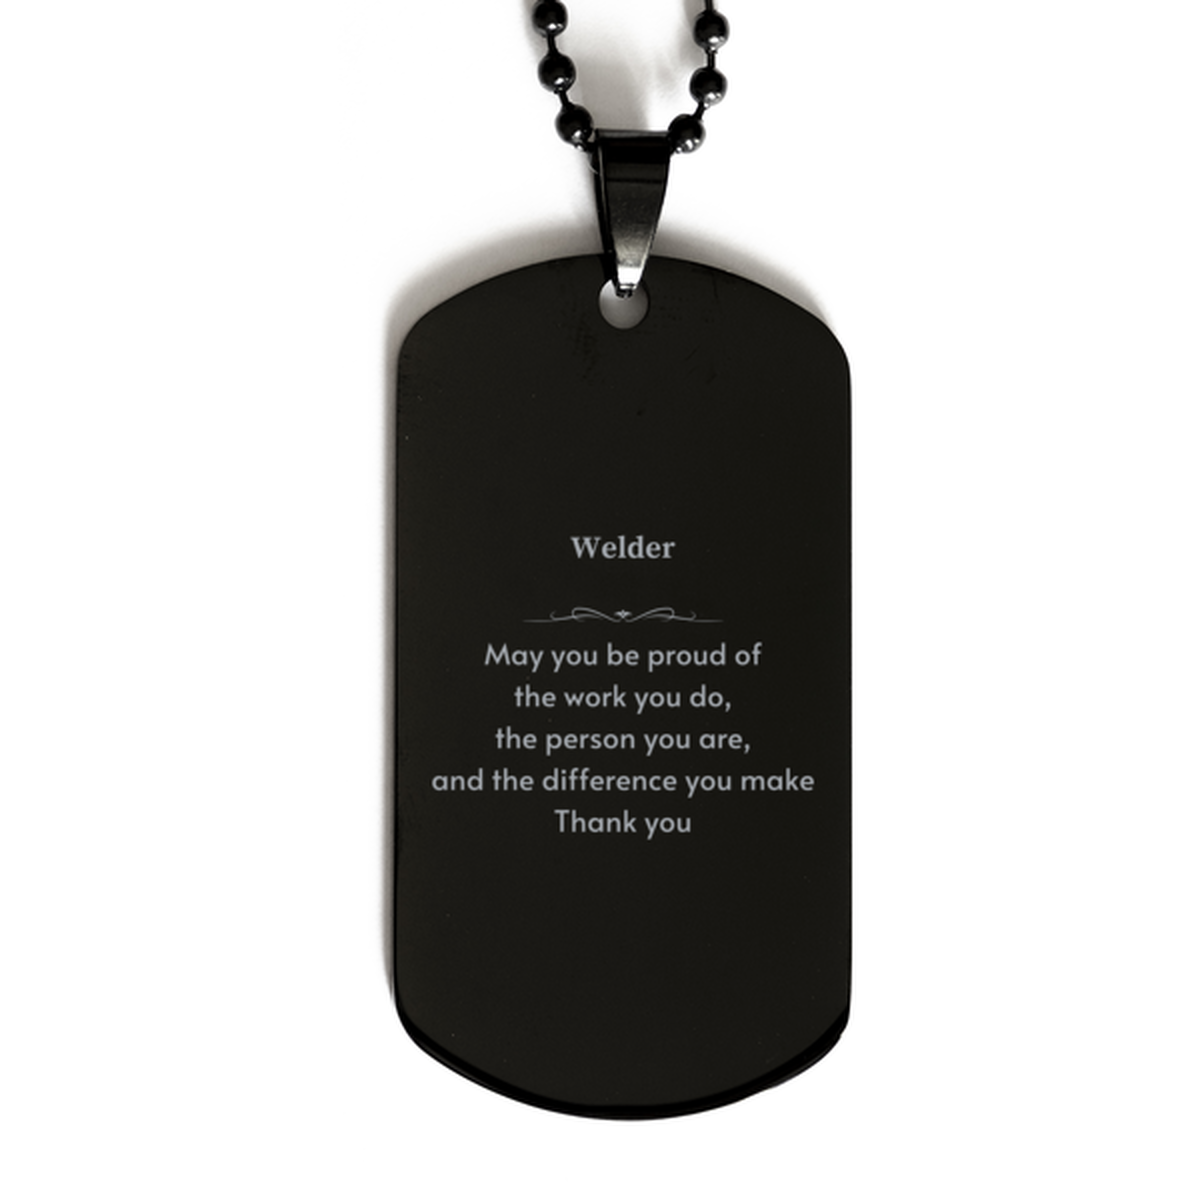 Heartwarming Black Dog Tag Retirement Coworkers Gifts for Welder, Welder May You be proud of the work you do, the person you are Gifts for Boss Men Women Friends